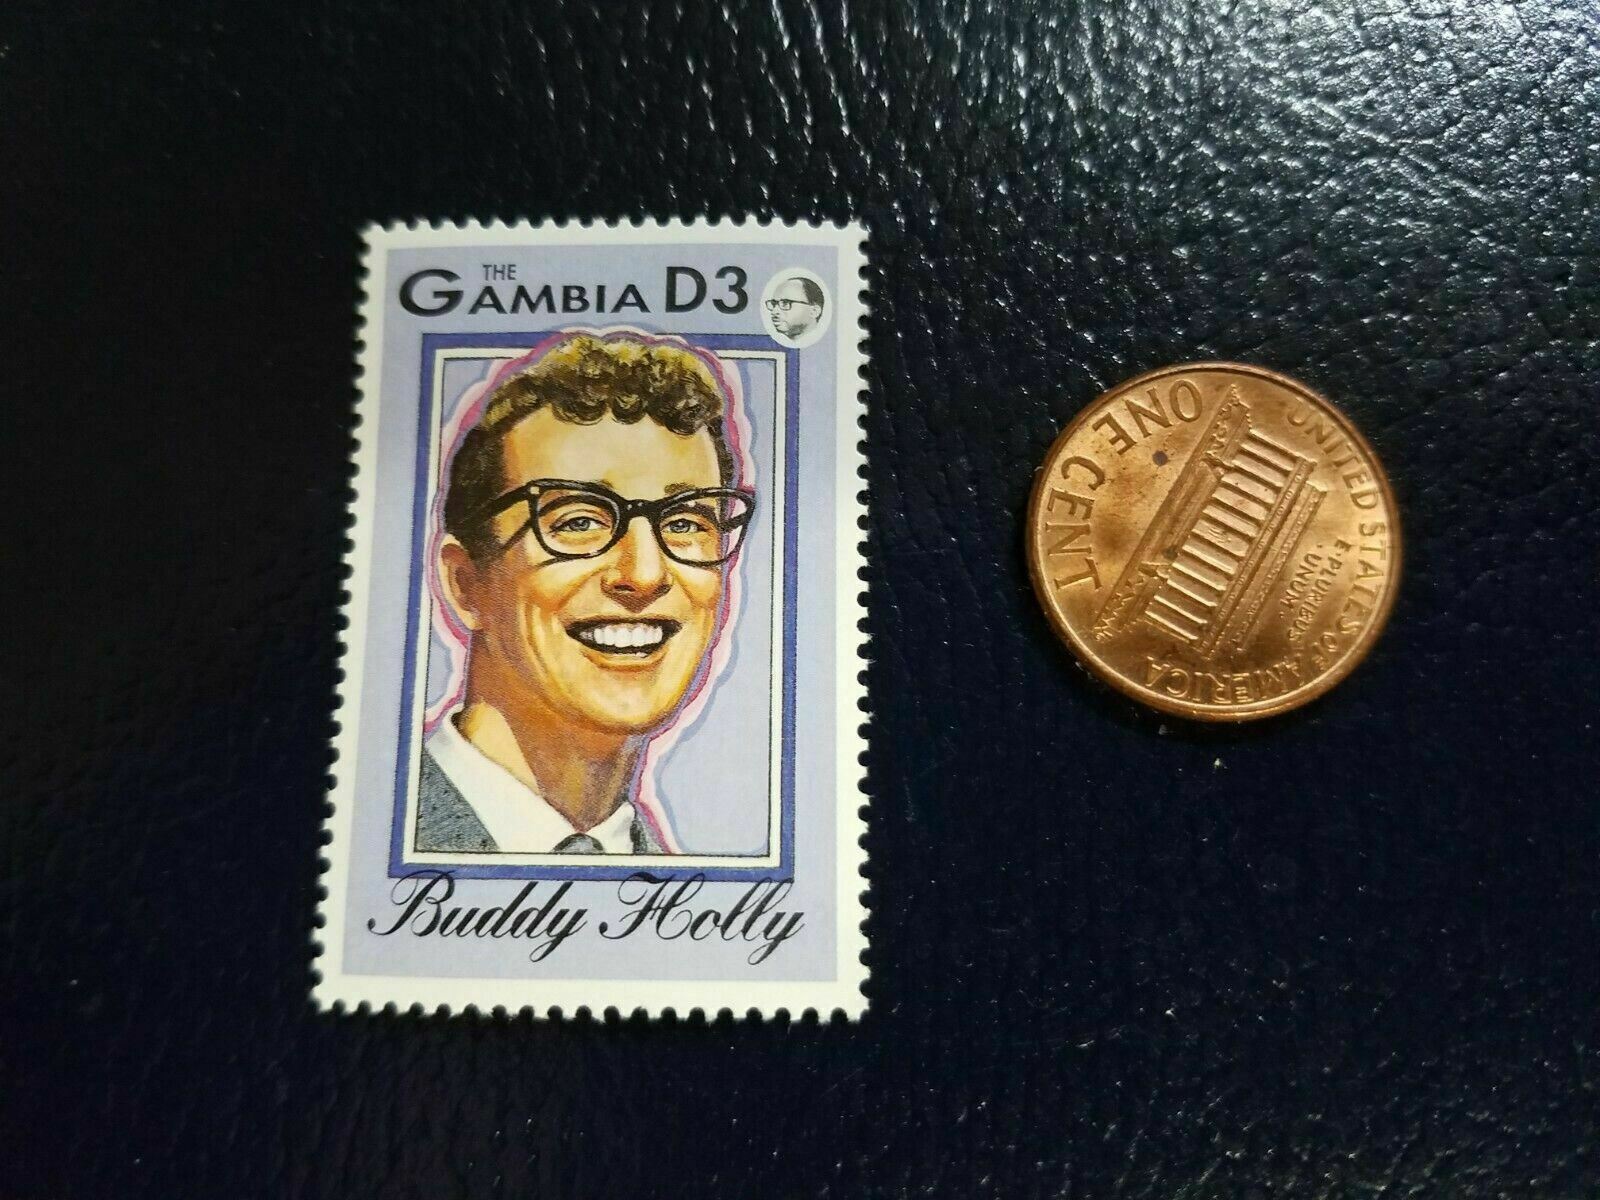 Buddy Holly American Singer-songwriter The Gambia D3 Perforated Stamp